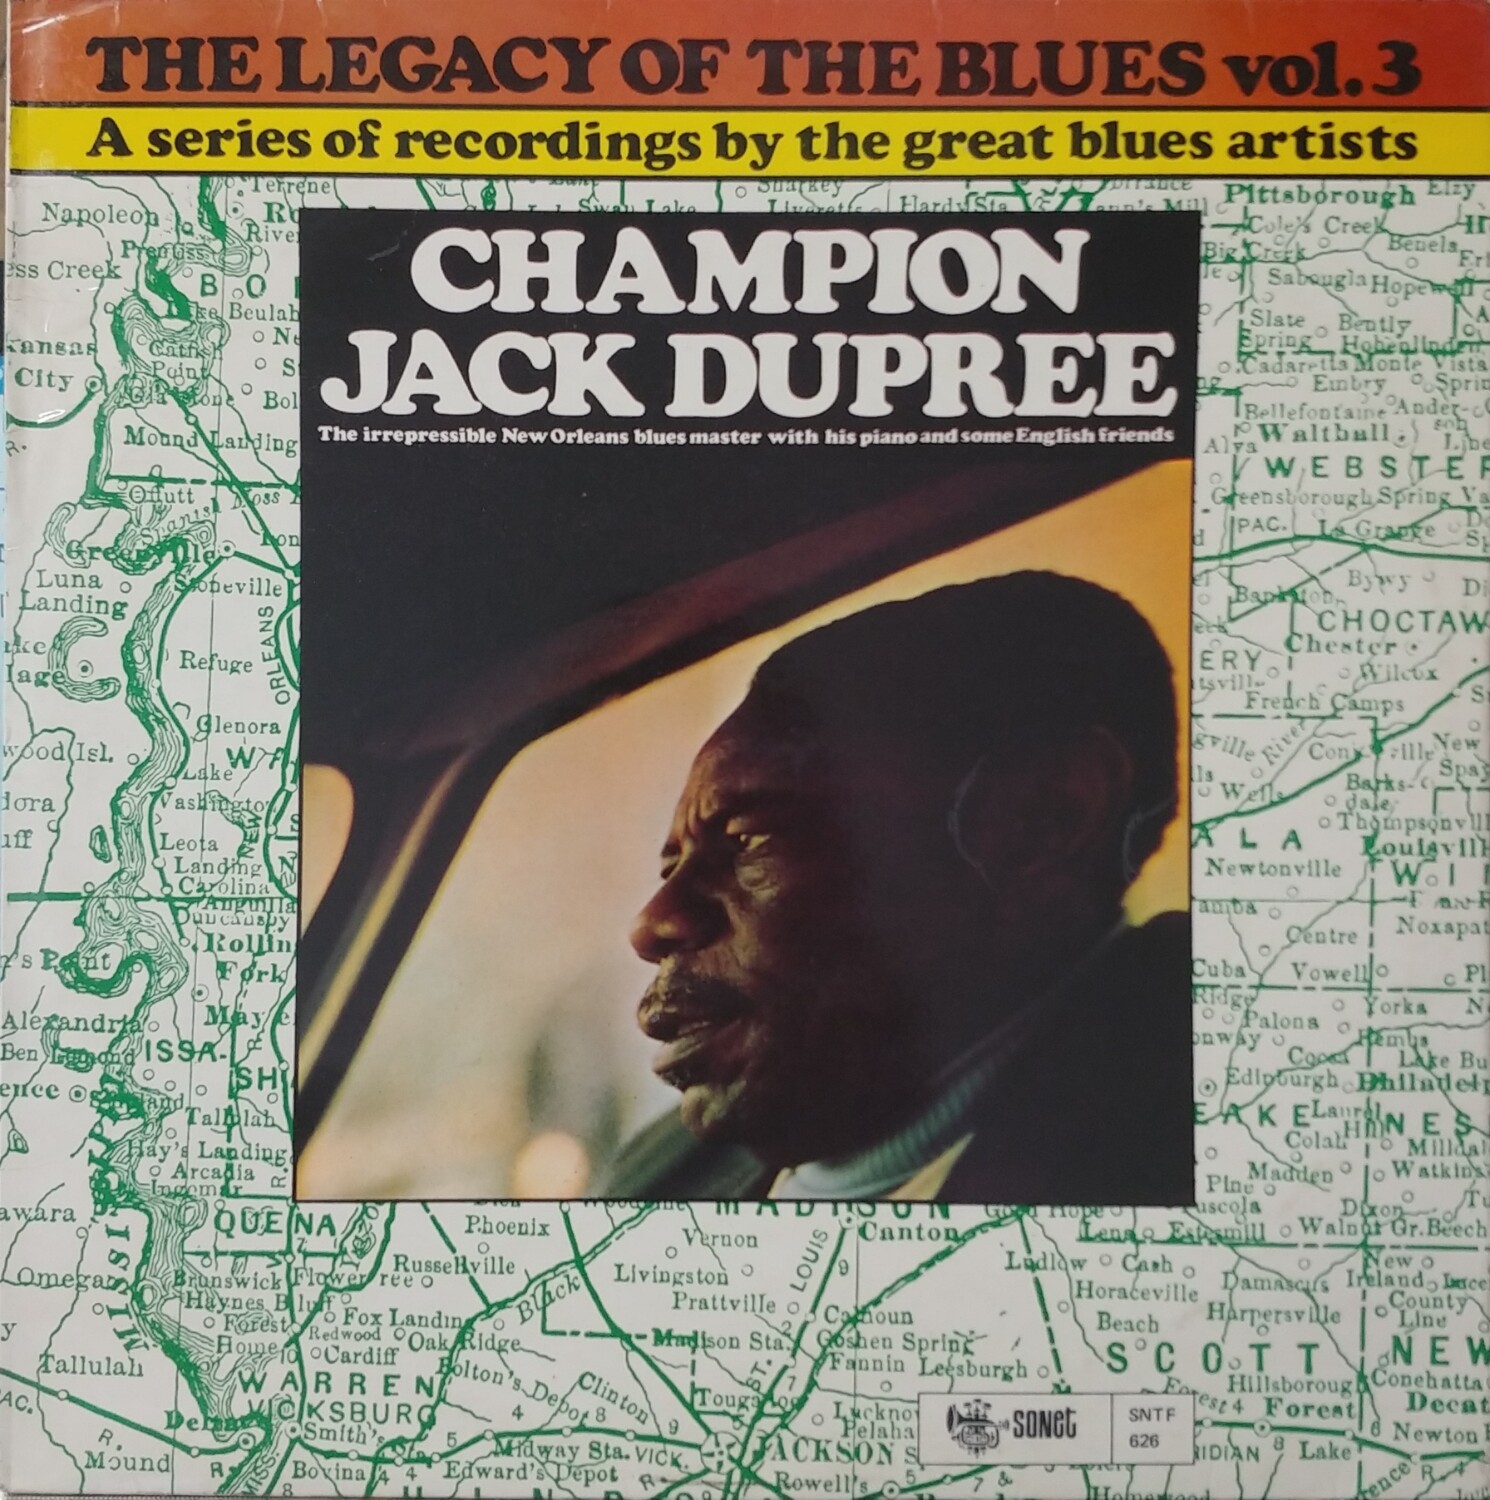 Champion Jack Dupree - Legacy of the blues